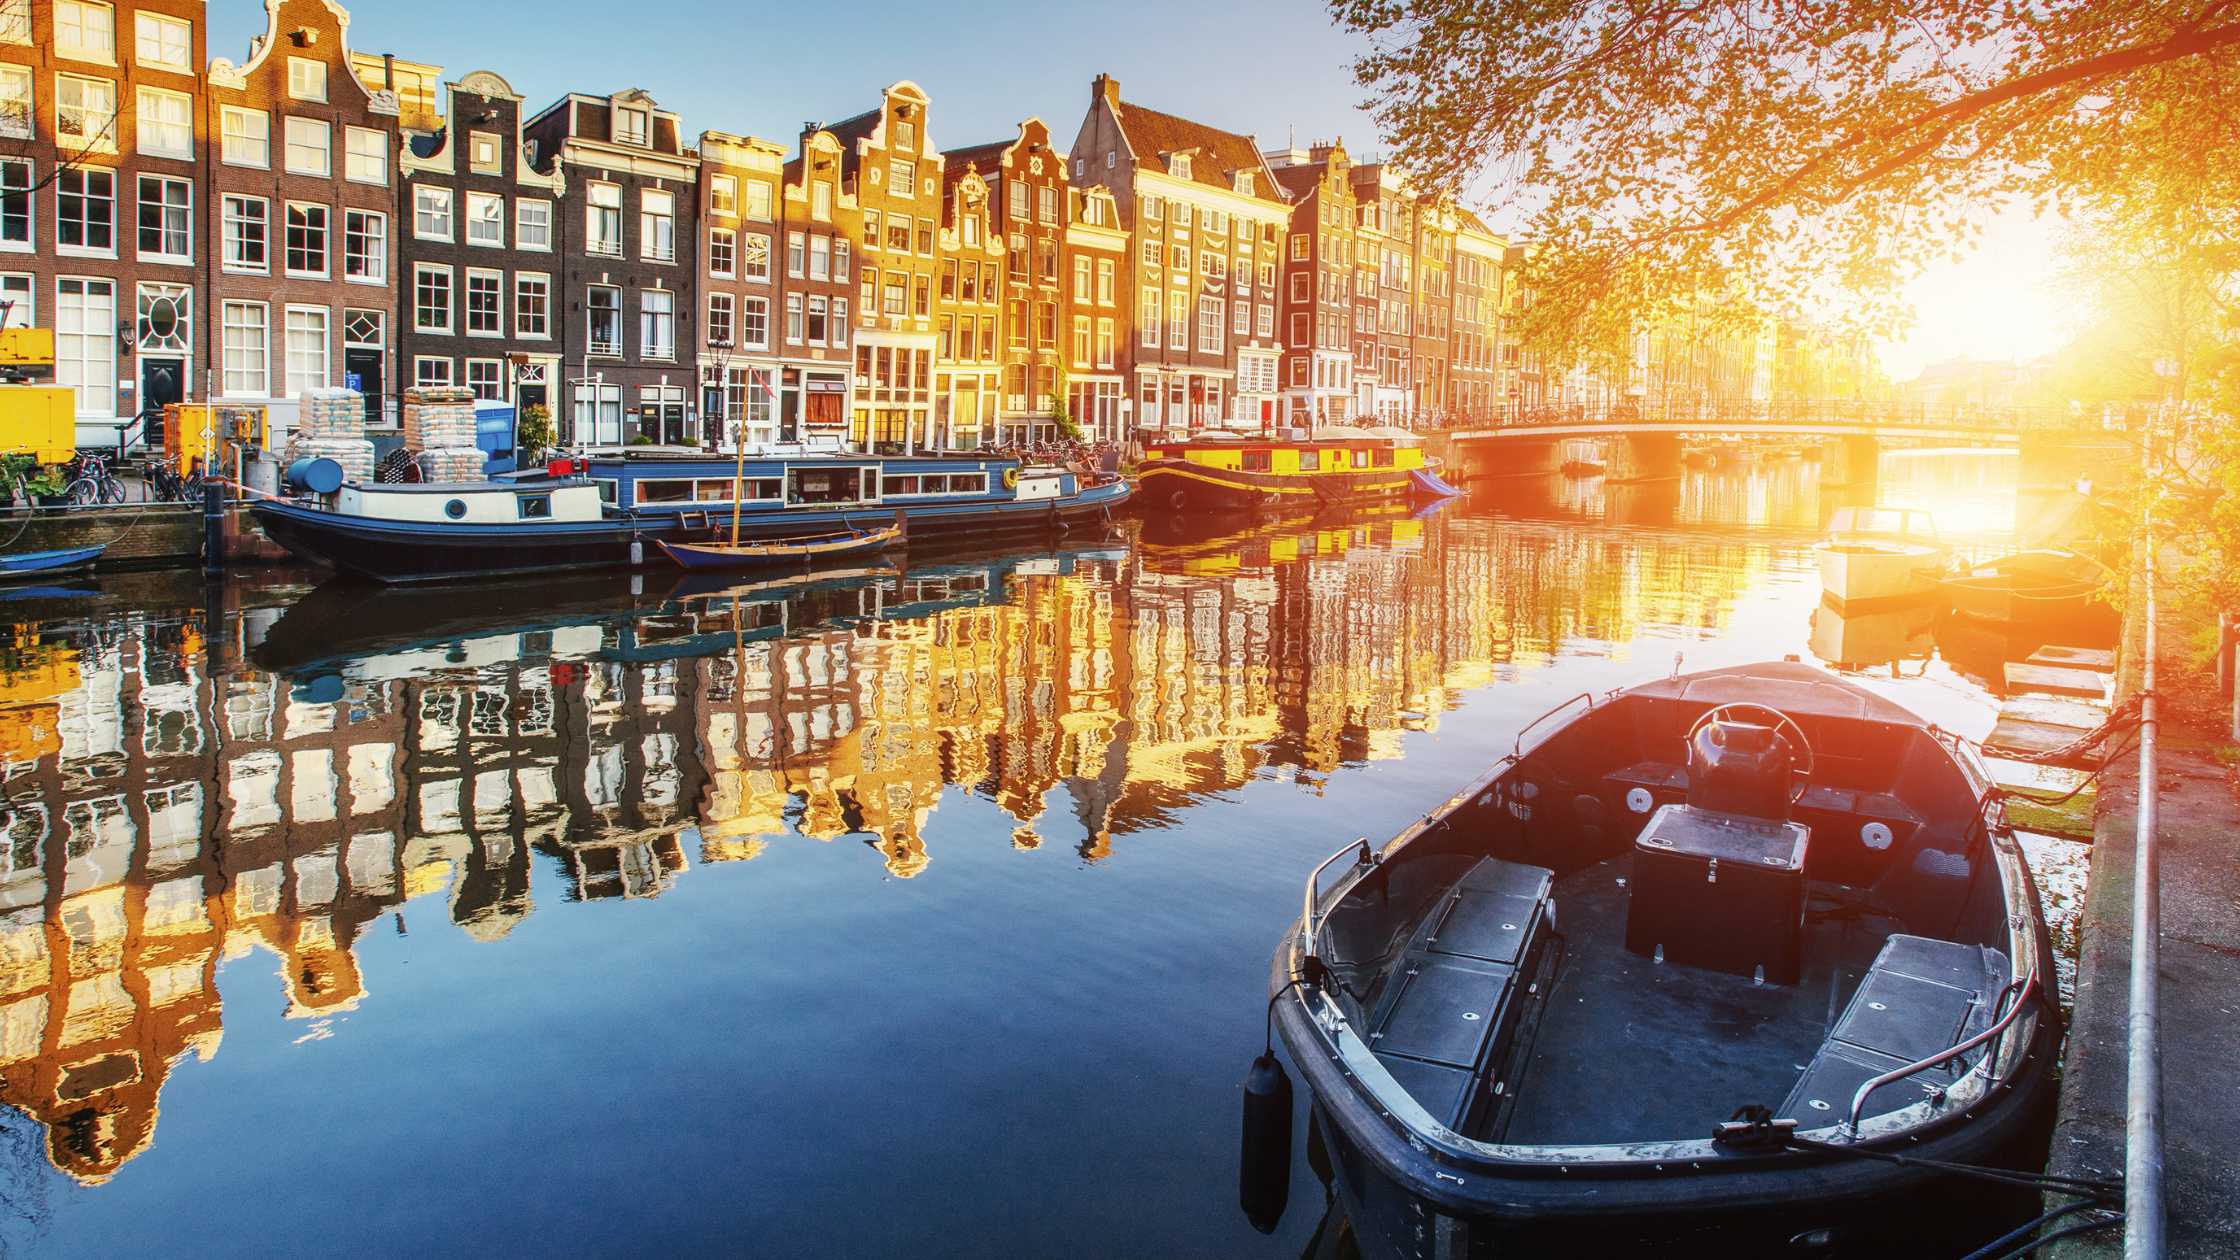 Amsterdam: let’s book the perfect holiday together!